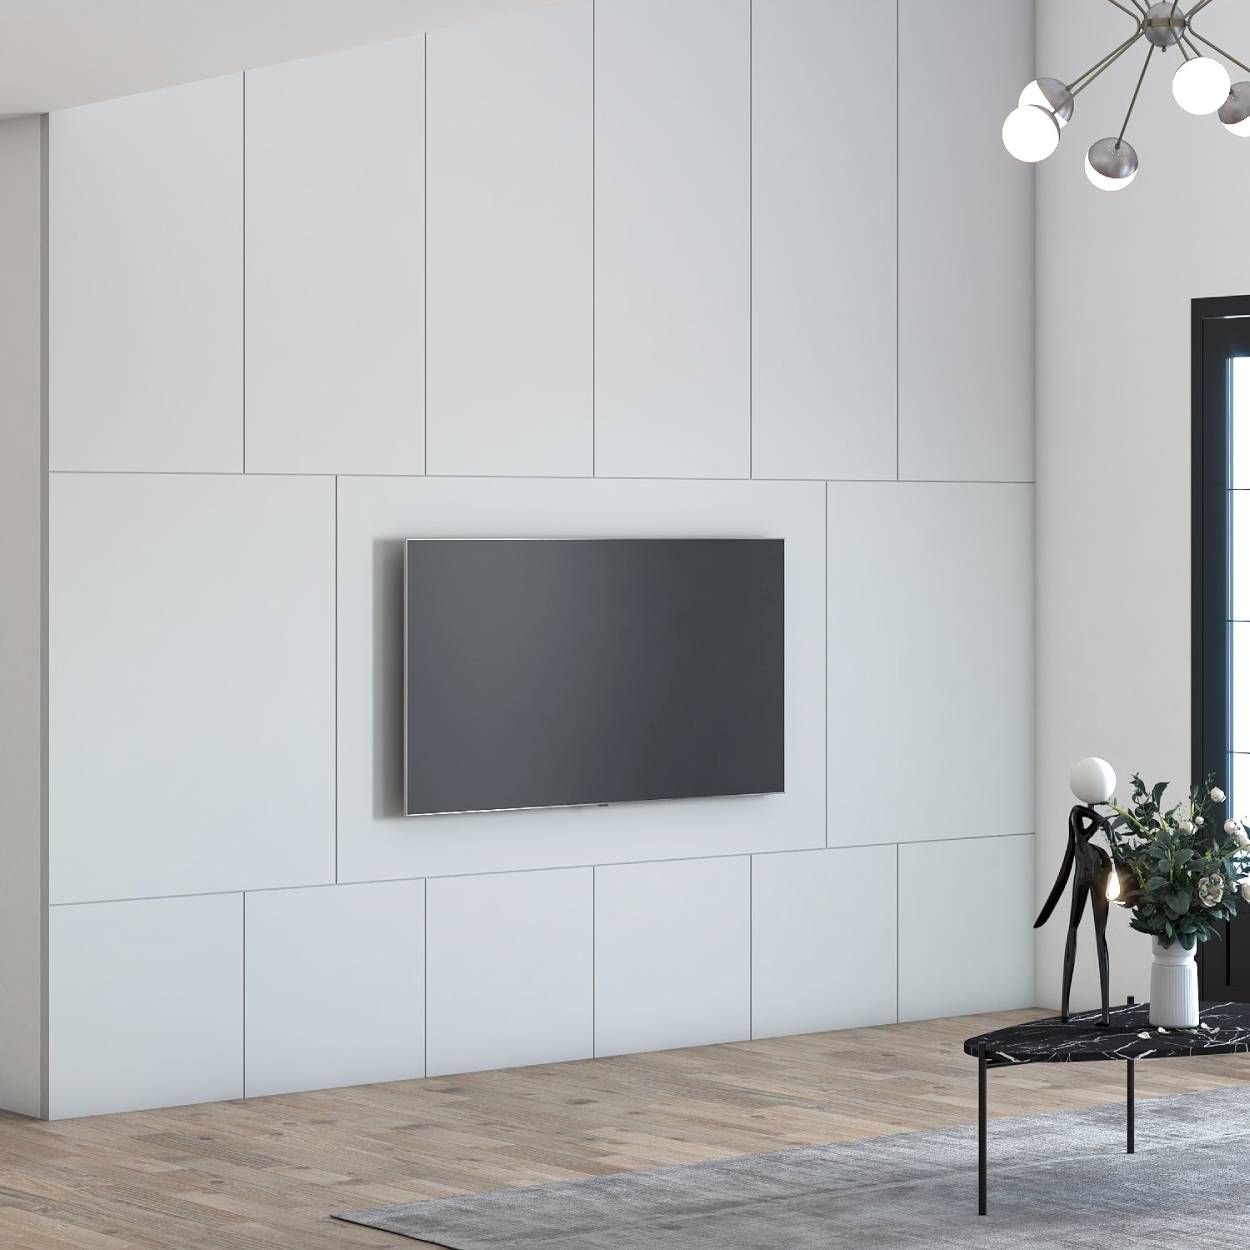 Minimal White TV Unit Design With White Backpanel And Grooves